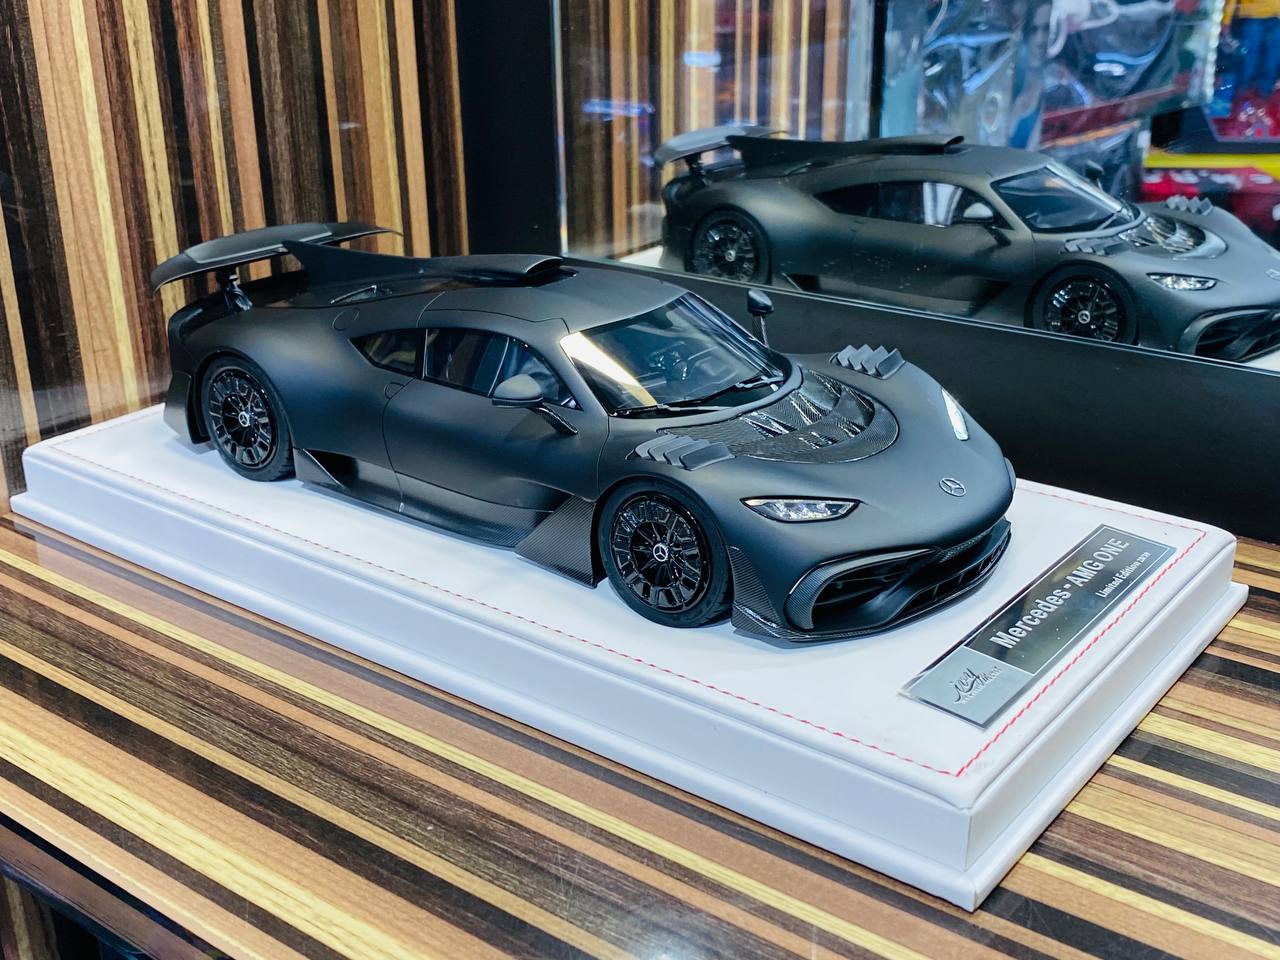 Exclusive IVY Models Mercedes Benz AMG ONE [Resin |Matt Black | Limited Edition]